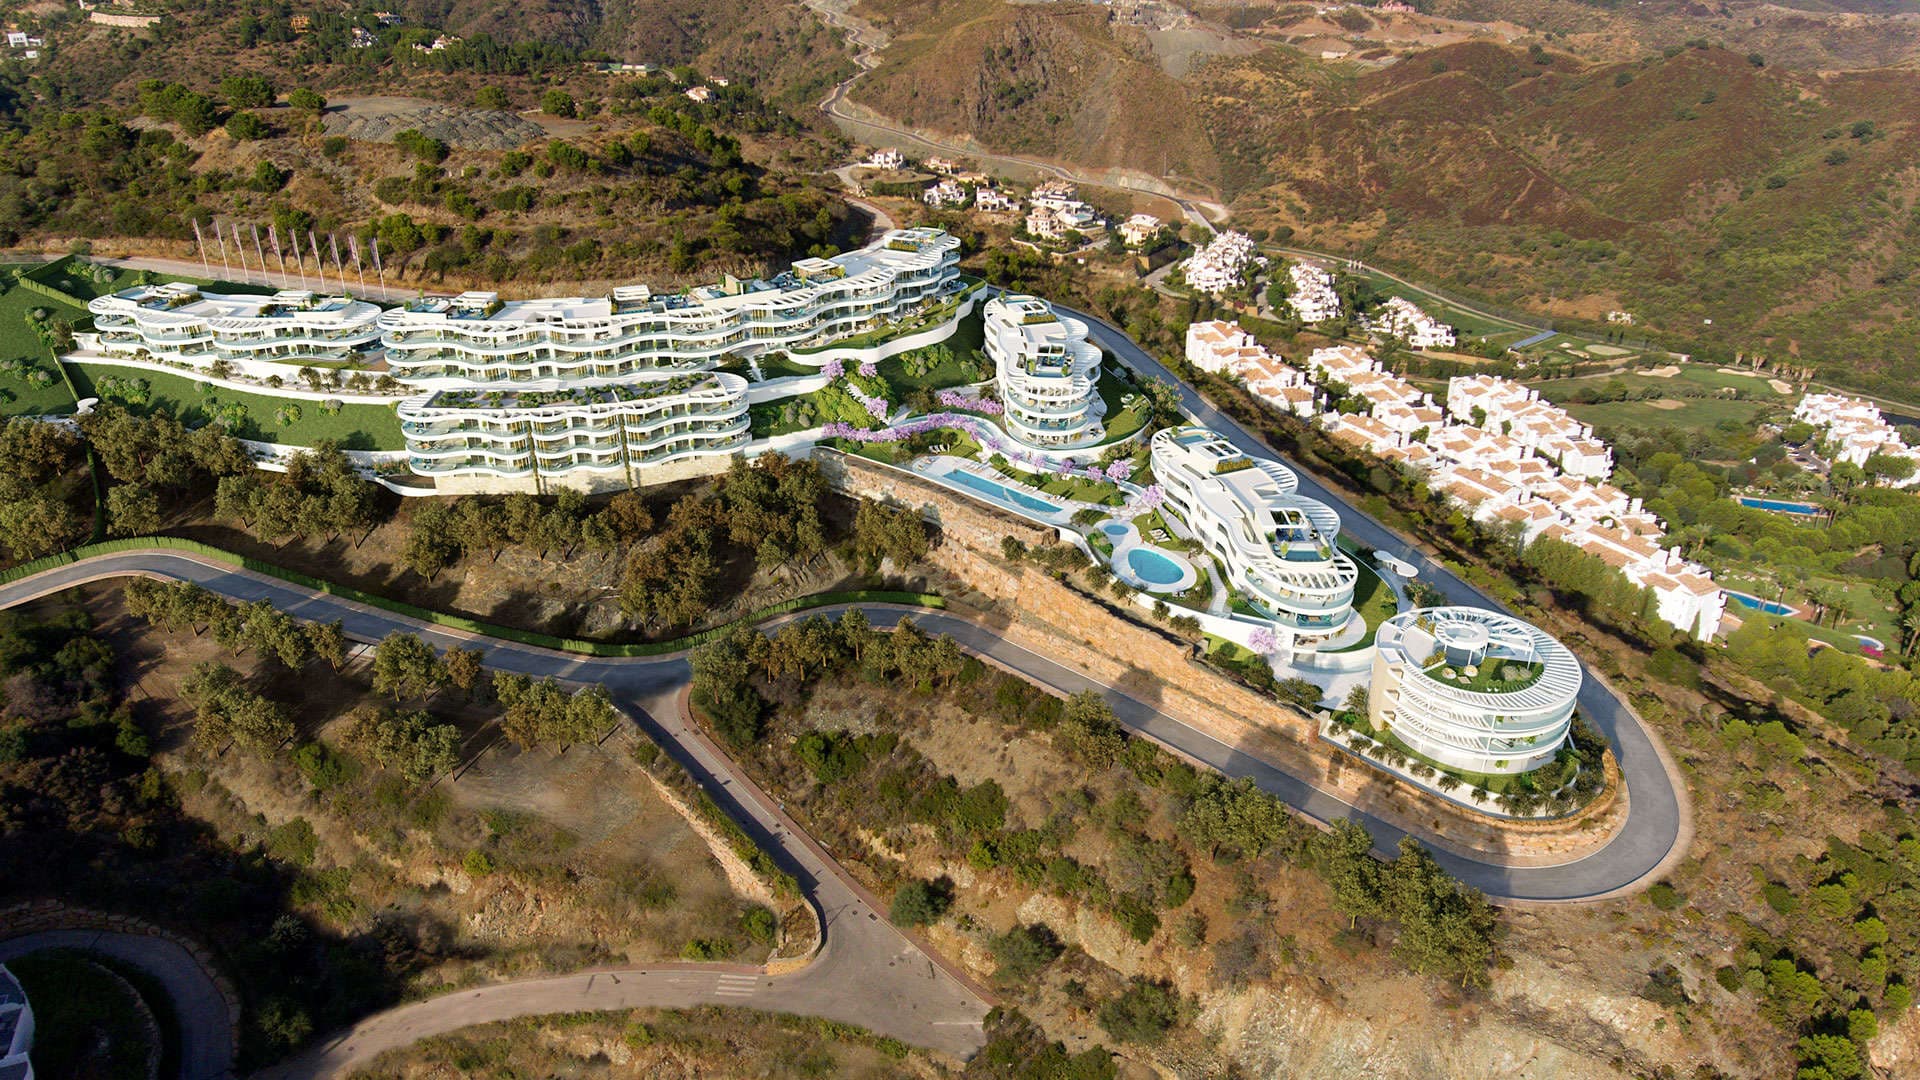 3 Bedroom Apartment For Sale The View Marbella Lp04167 27b1a5edc4b73400.jpg